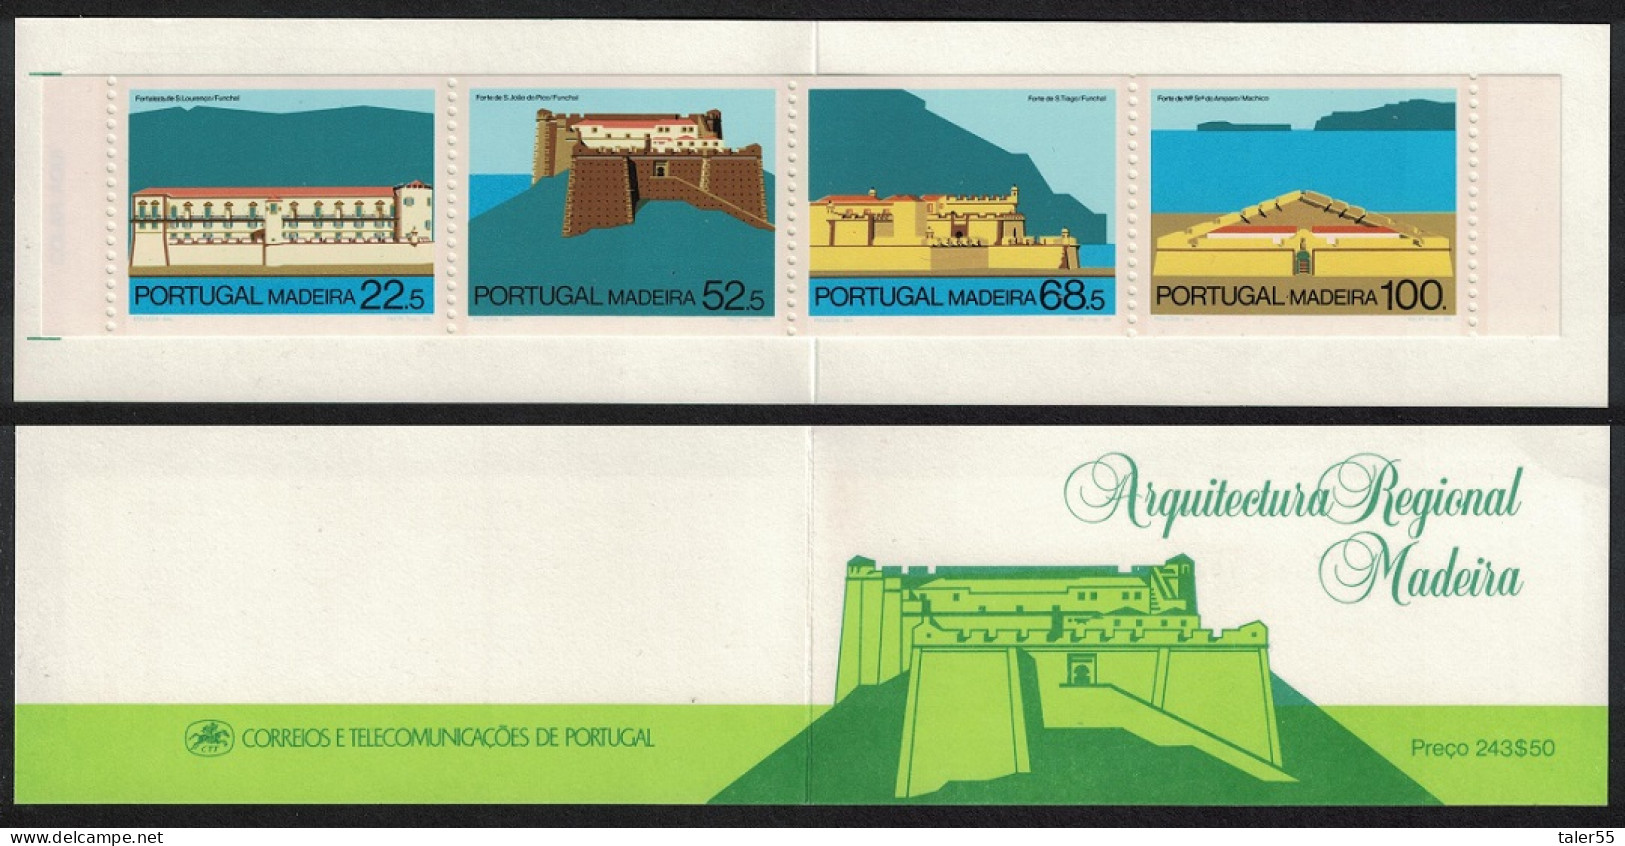 Madeira Fortresses Booklet Of 4v 1986 MNH SG#226-229 MI#MH 6 - Madère